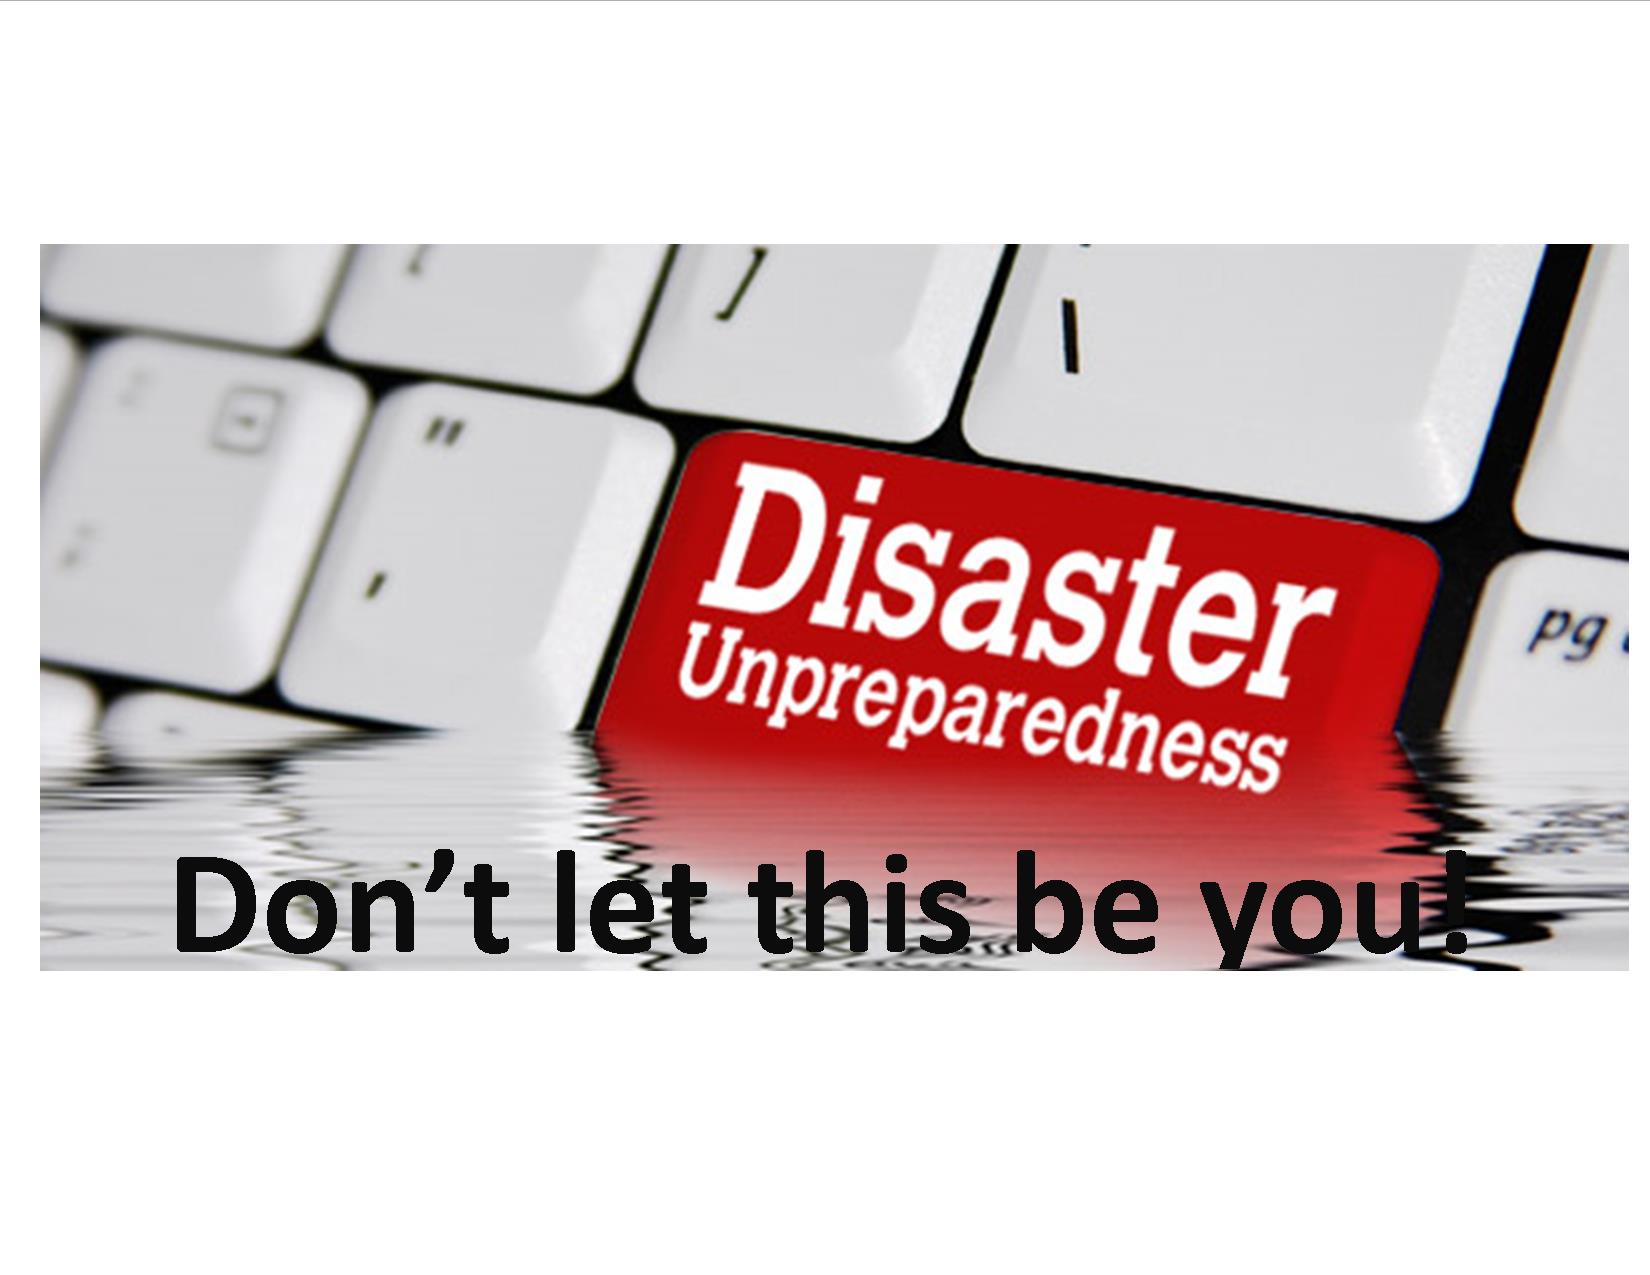 Is you business prepared for a disaster?